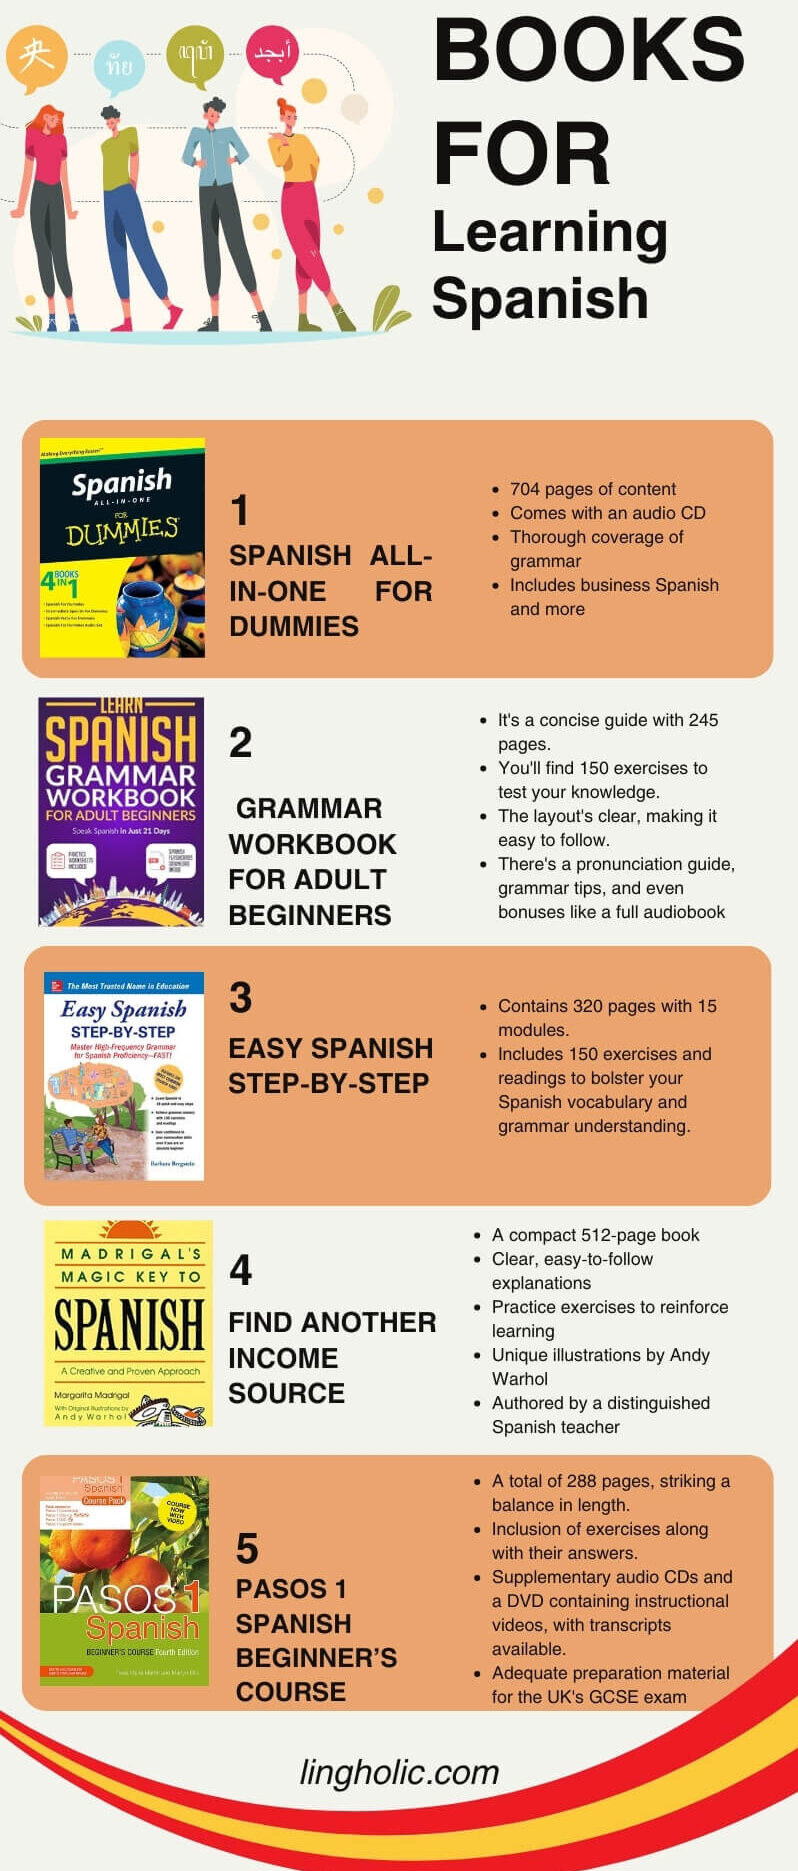 Infographic about Books for Learning Spanish Language